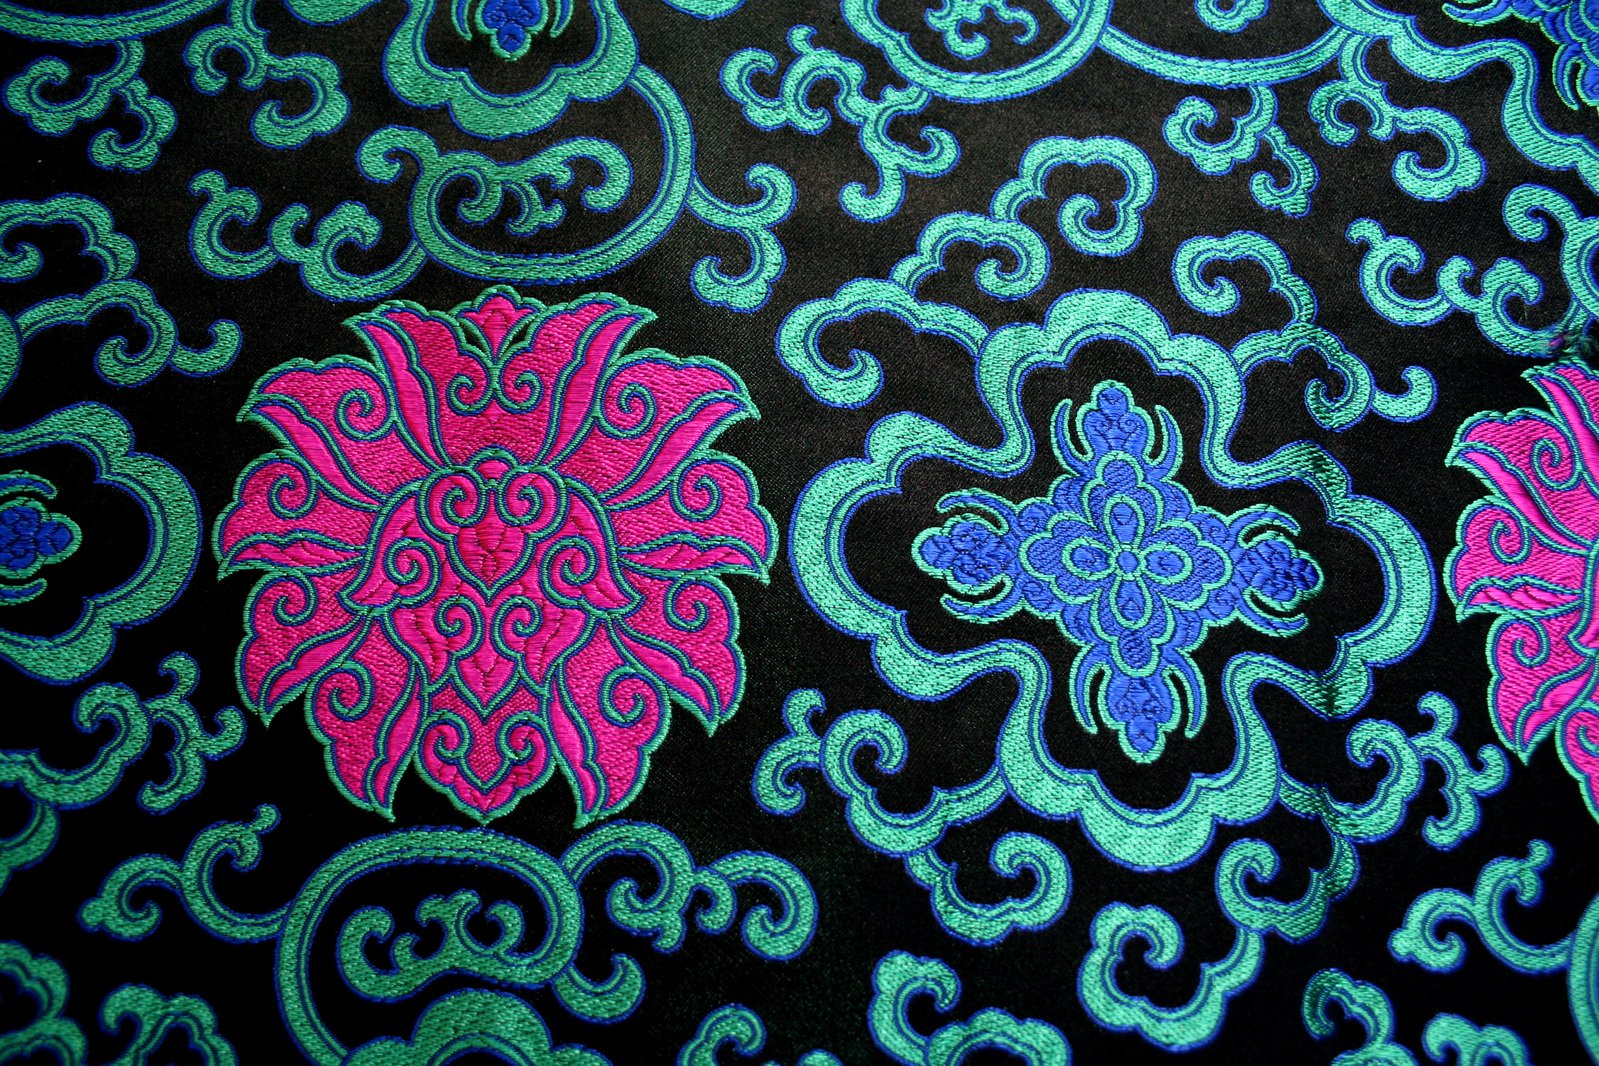 multicolored ornate design with blue and pink on black fabric